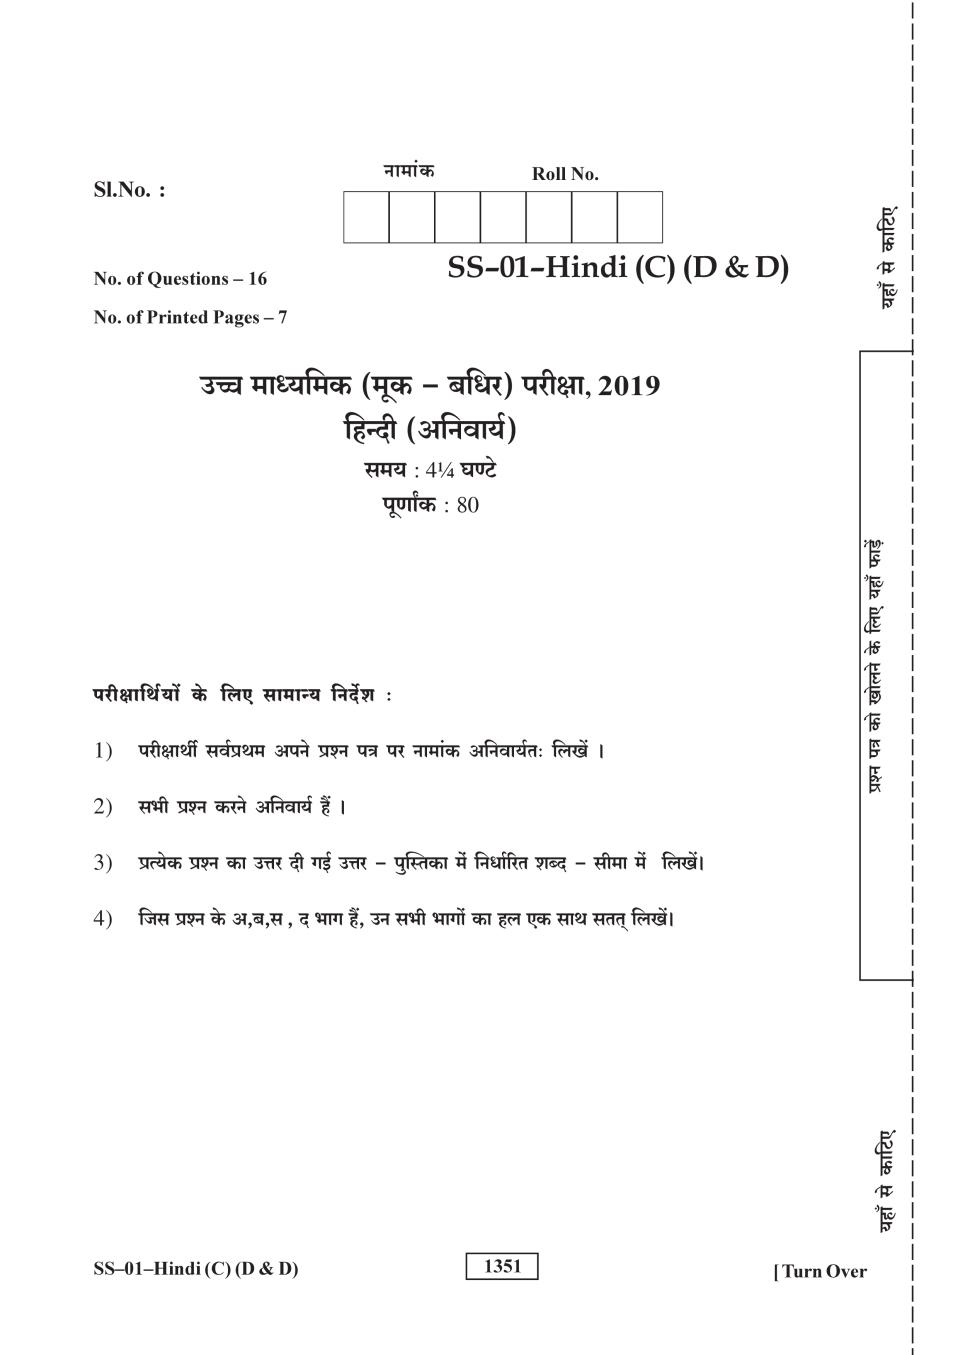 Rajasthan Board 12th Class Hindi (D&D) Question Paper 2019 - Page 1